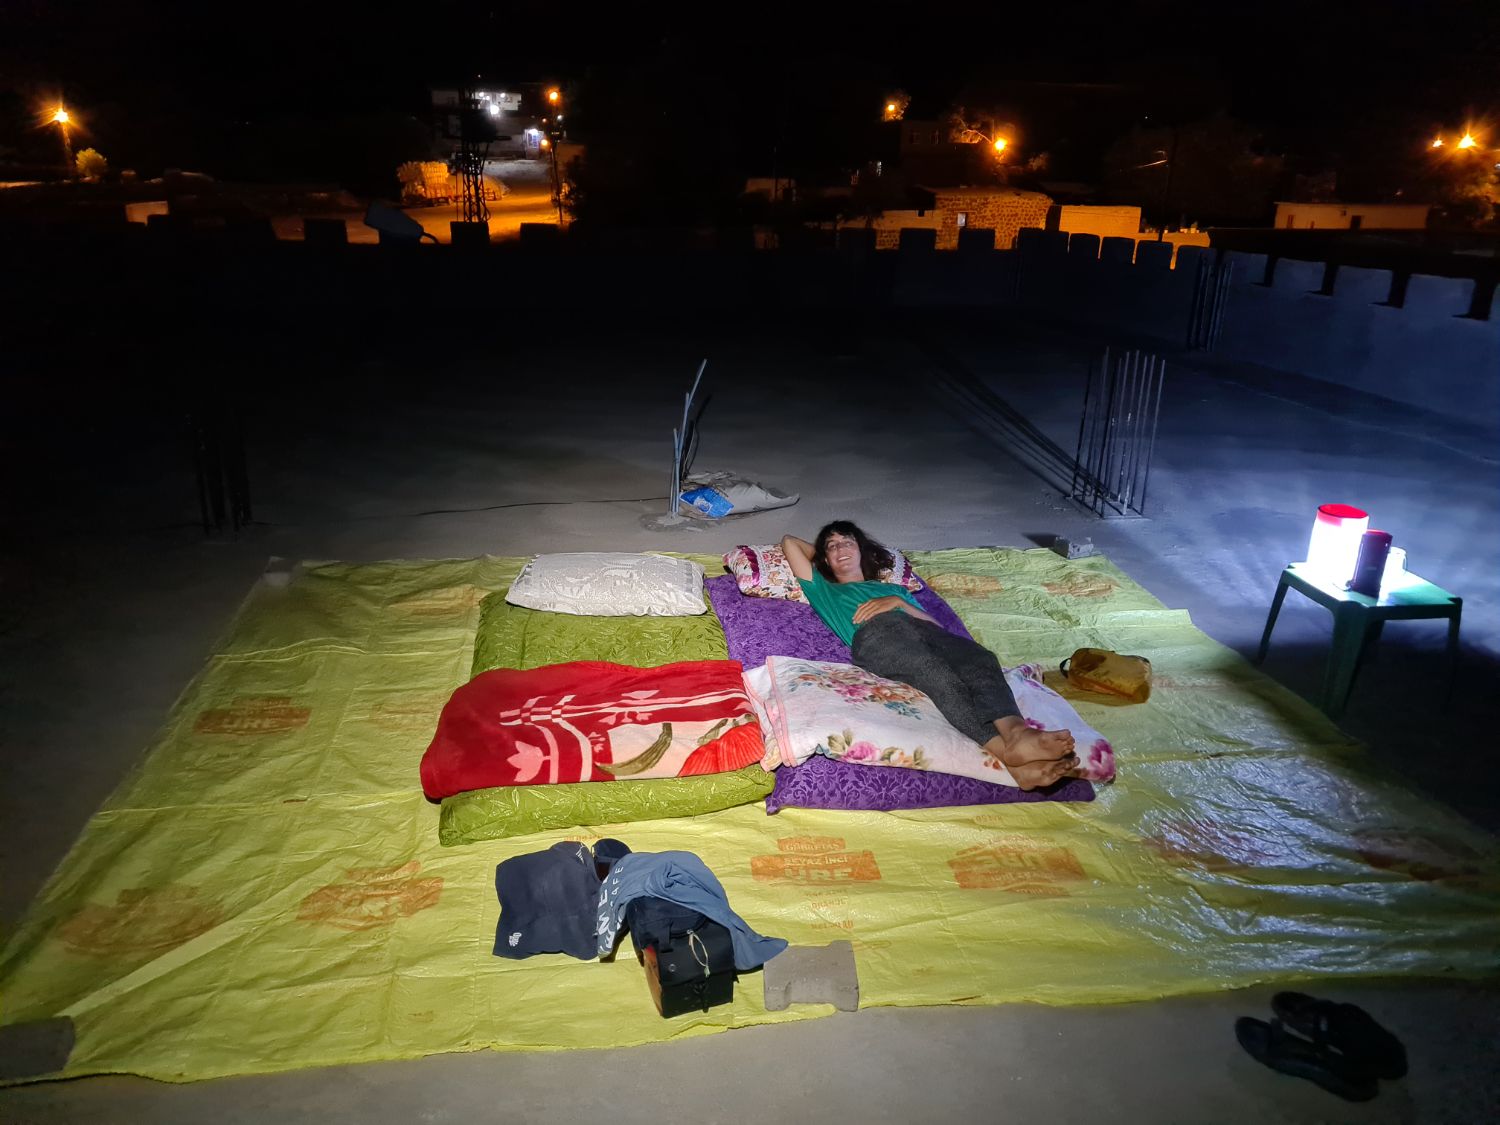 Sleeping on the roof under the stars